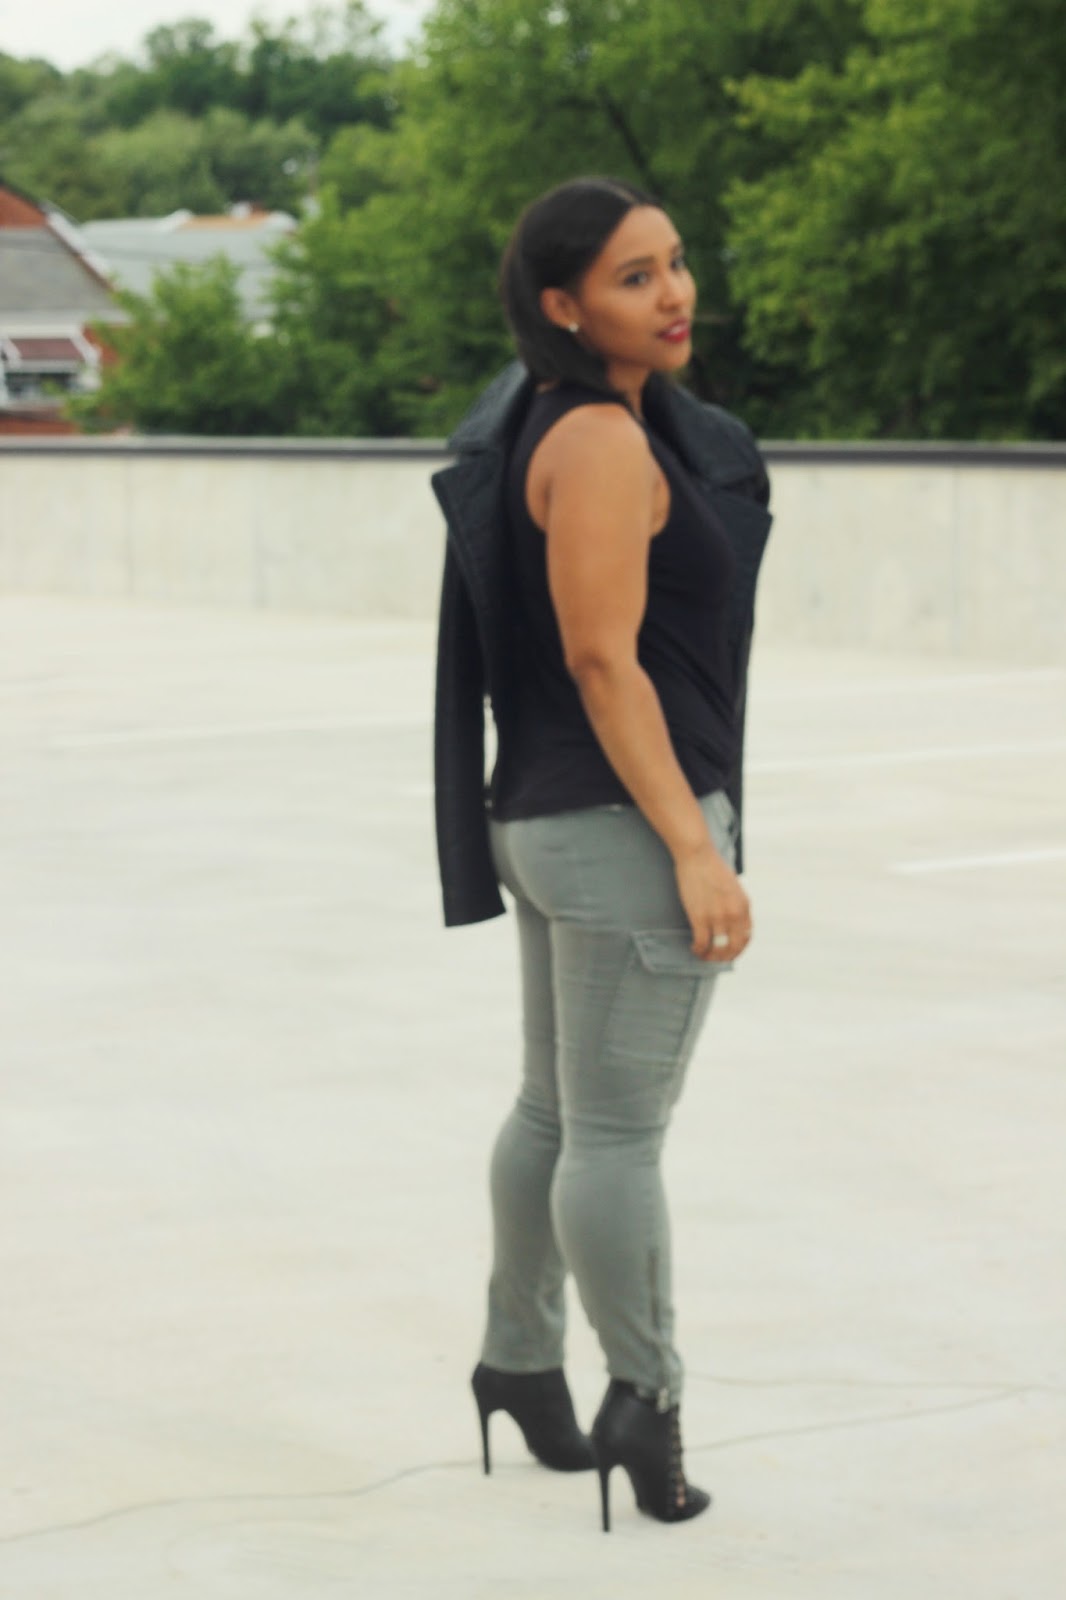 fall, motto jacket, booties, fall outfits, cargo pants